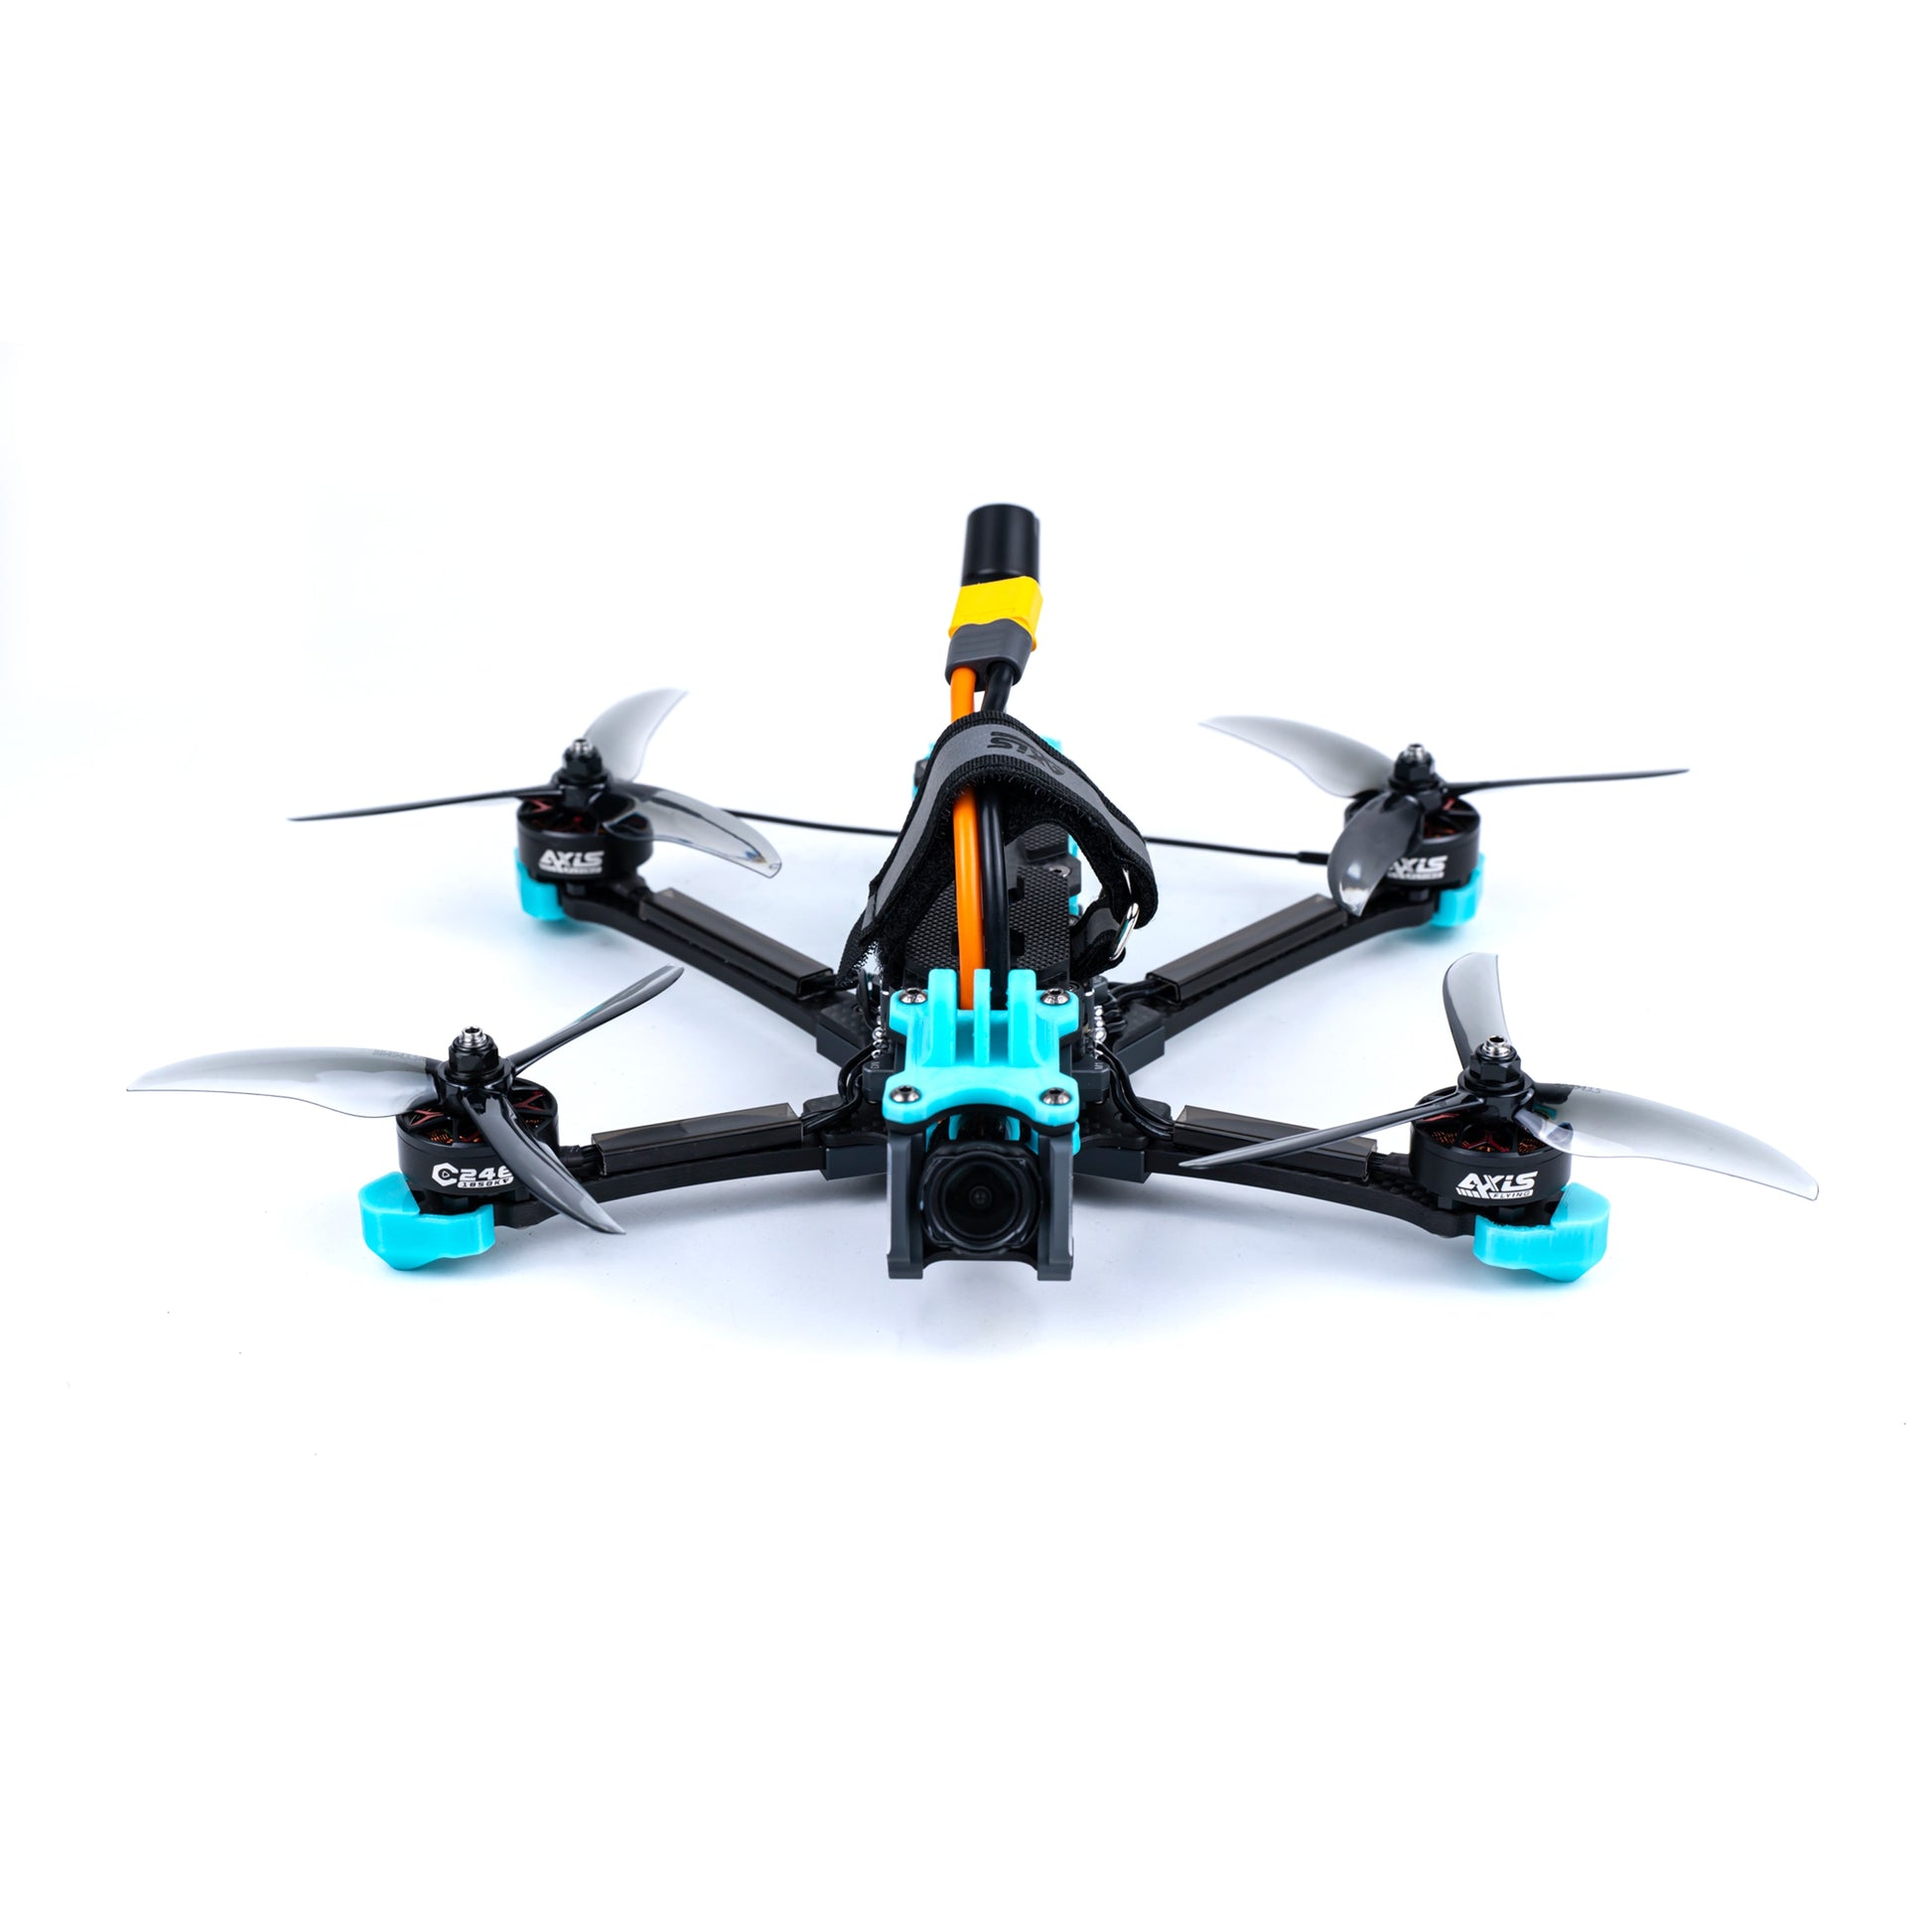 Axisflying MANTA5" - 5inch FPV Freestyle DeadCat-DC DJI O3 Air Unit with GPS - 4S